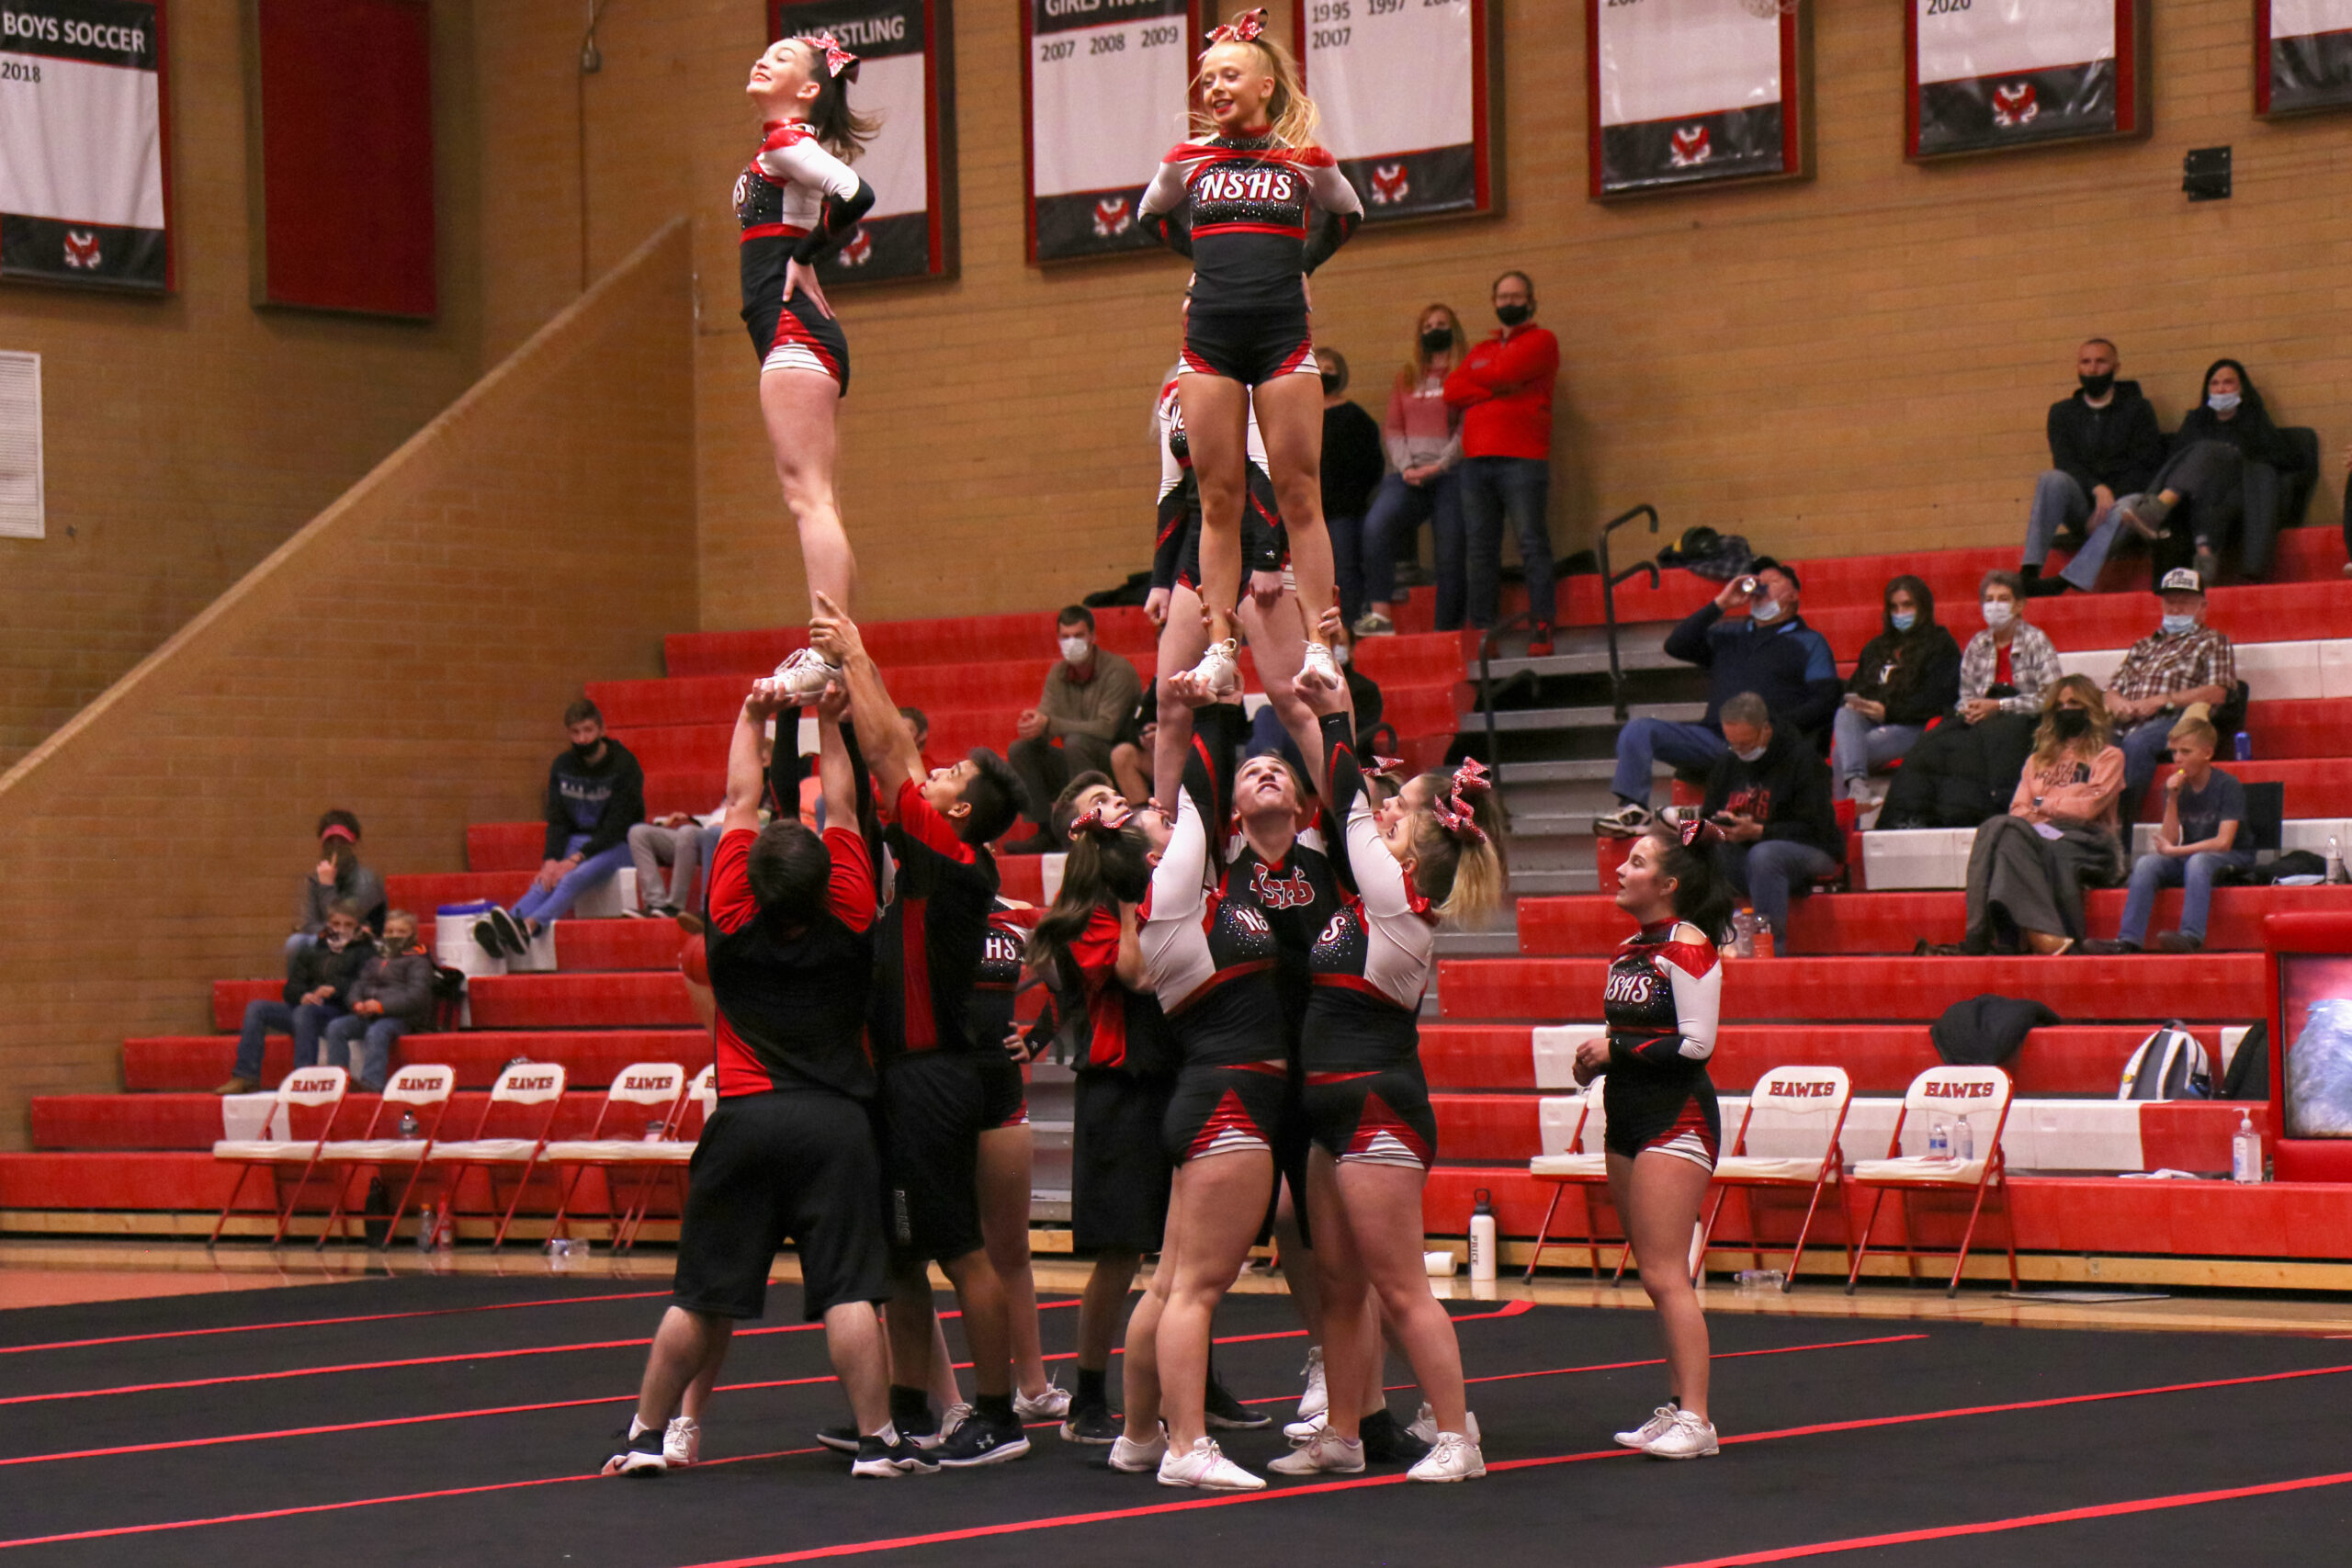 Cheer takes state, overcoming season challenges